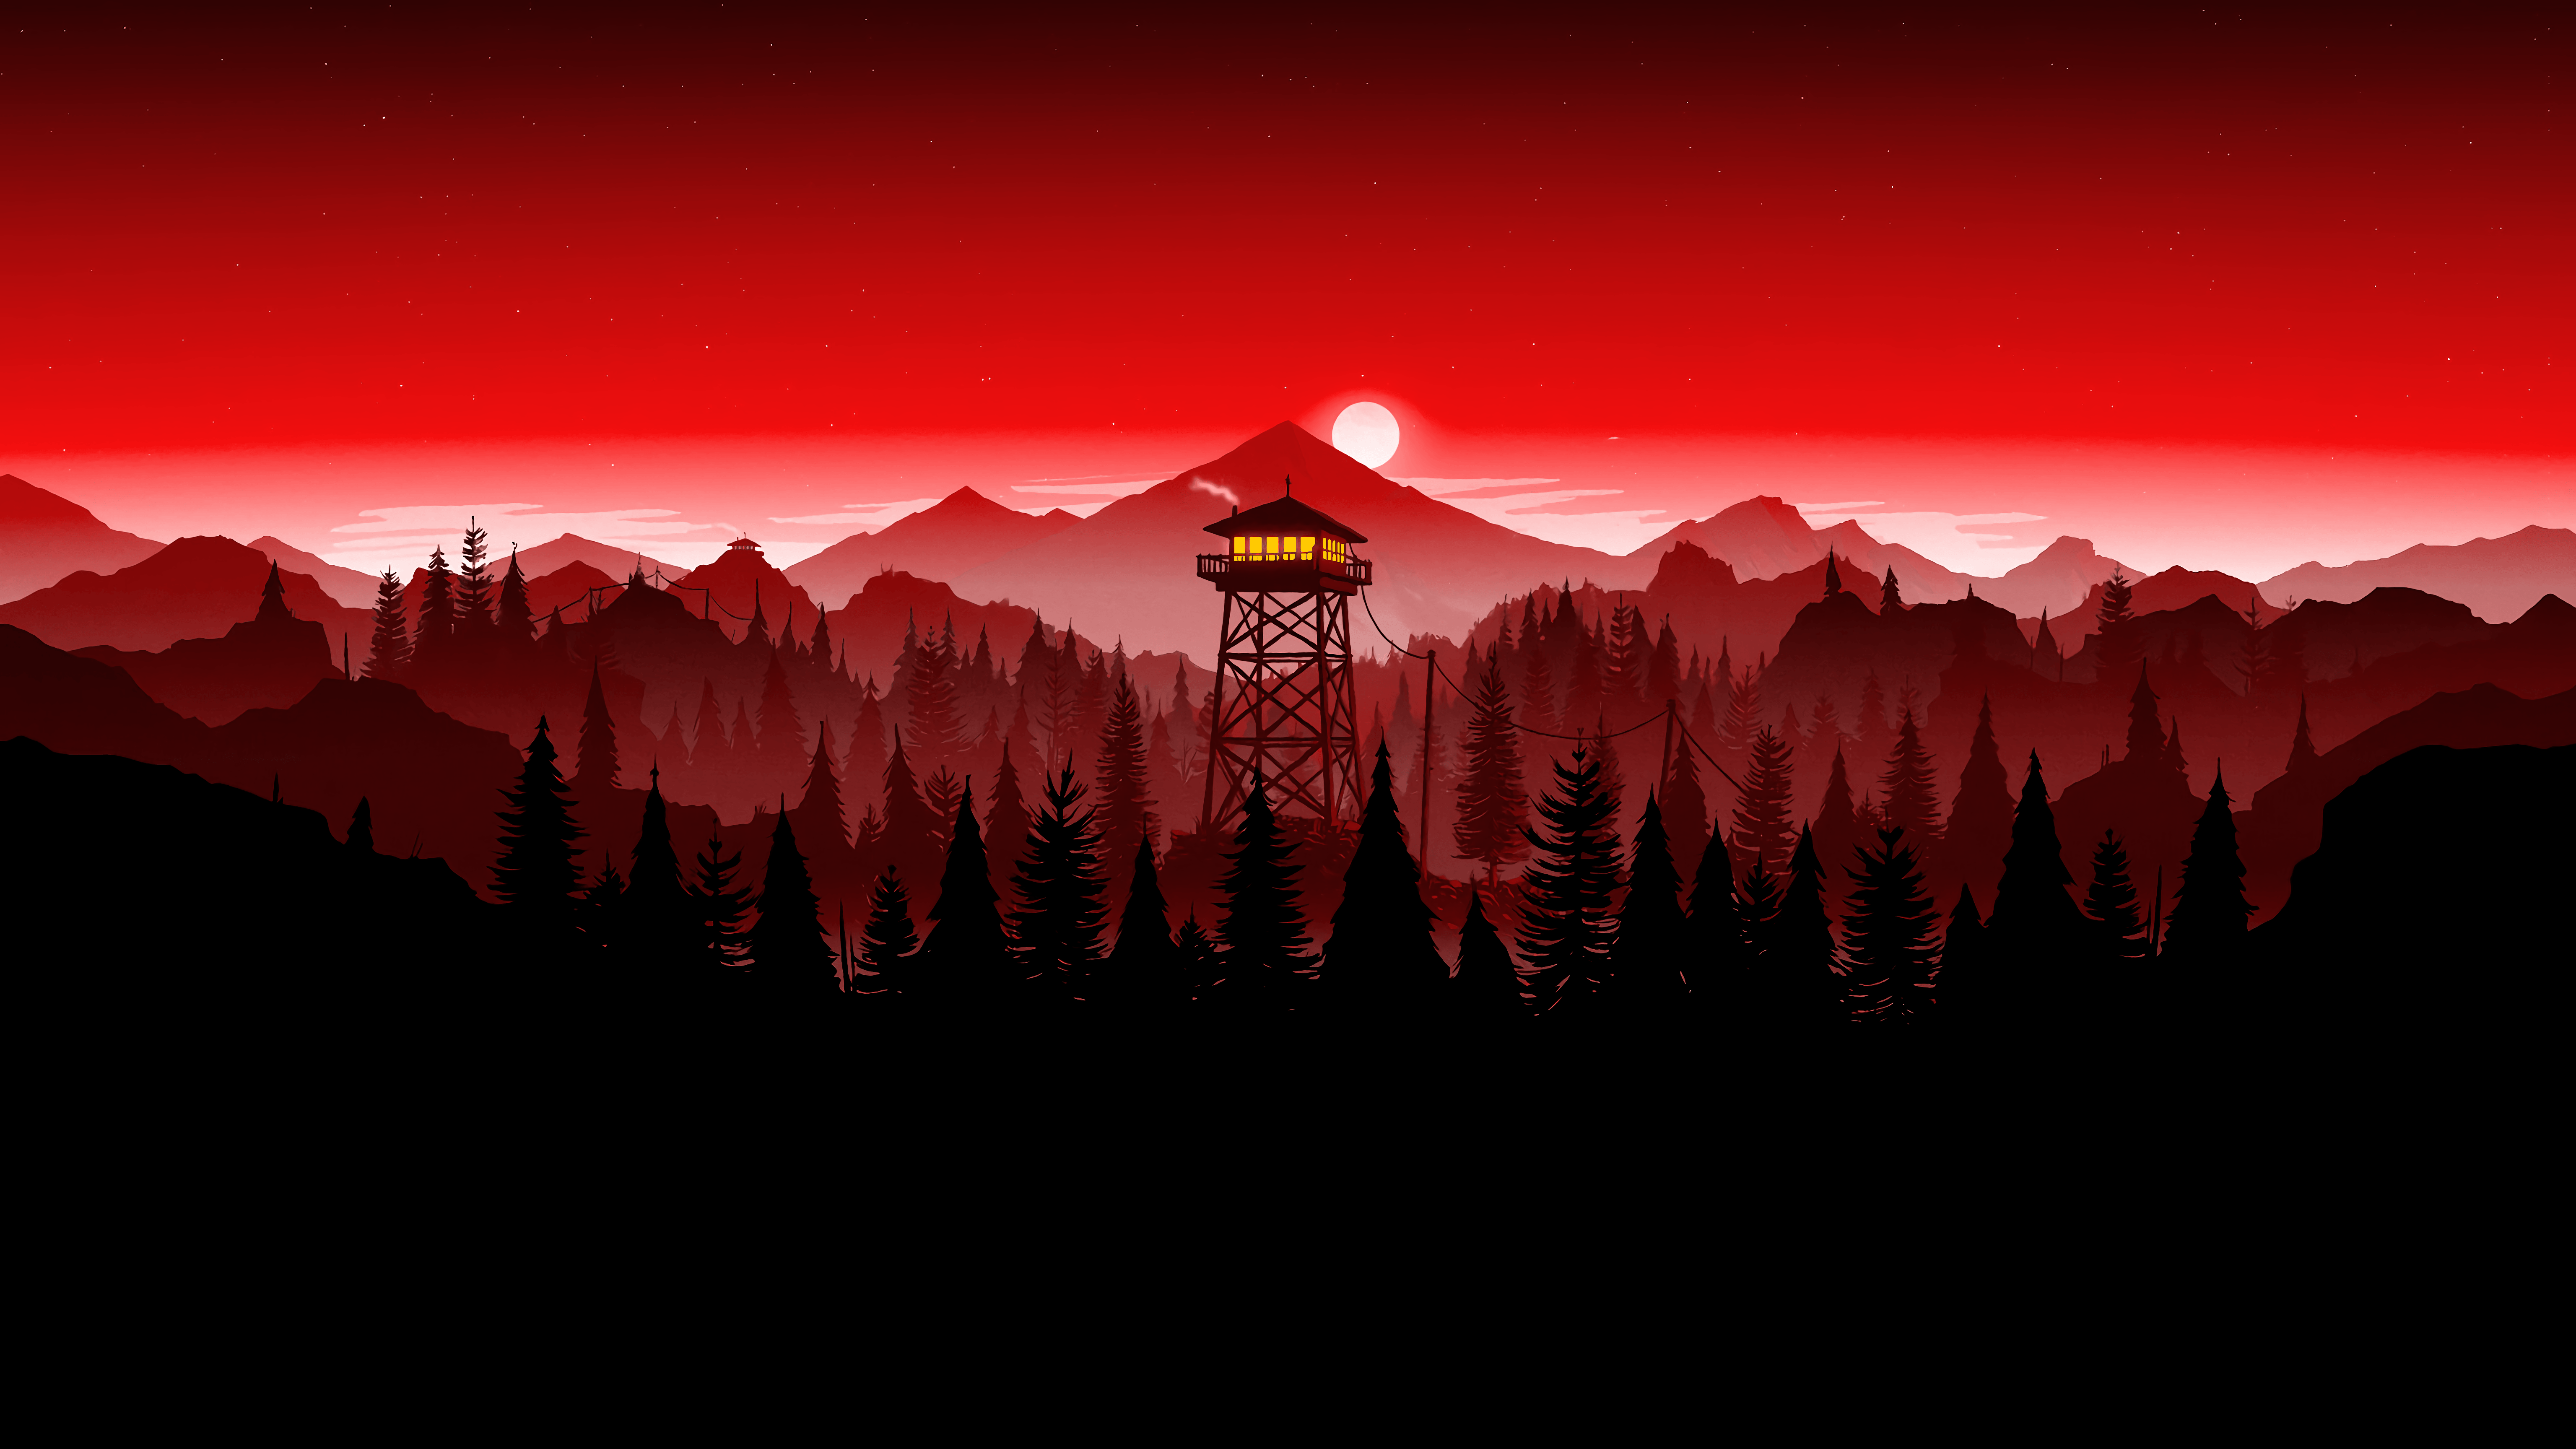 Firewatch instal the new for windows